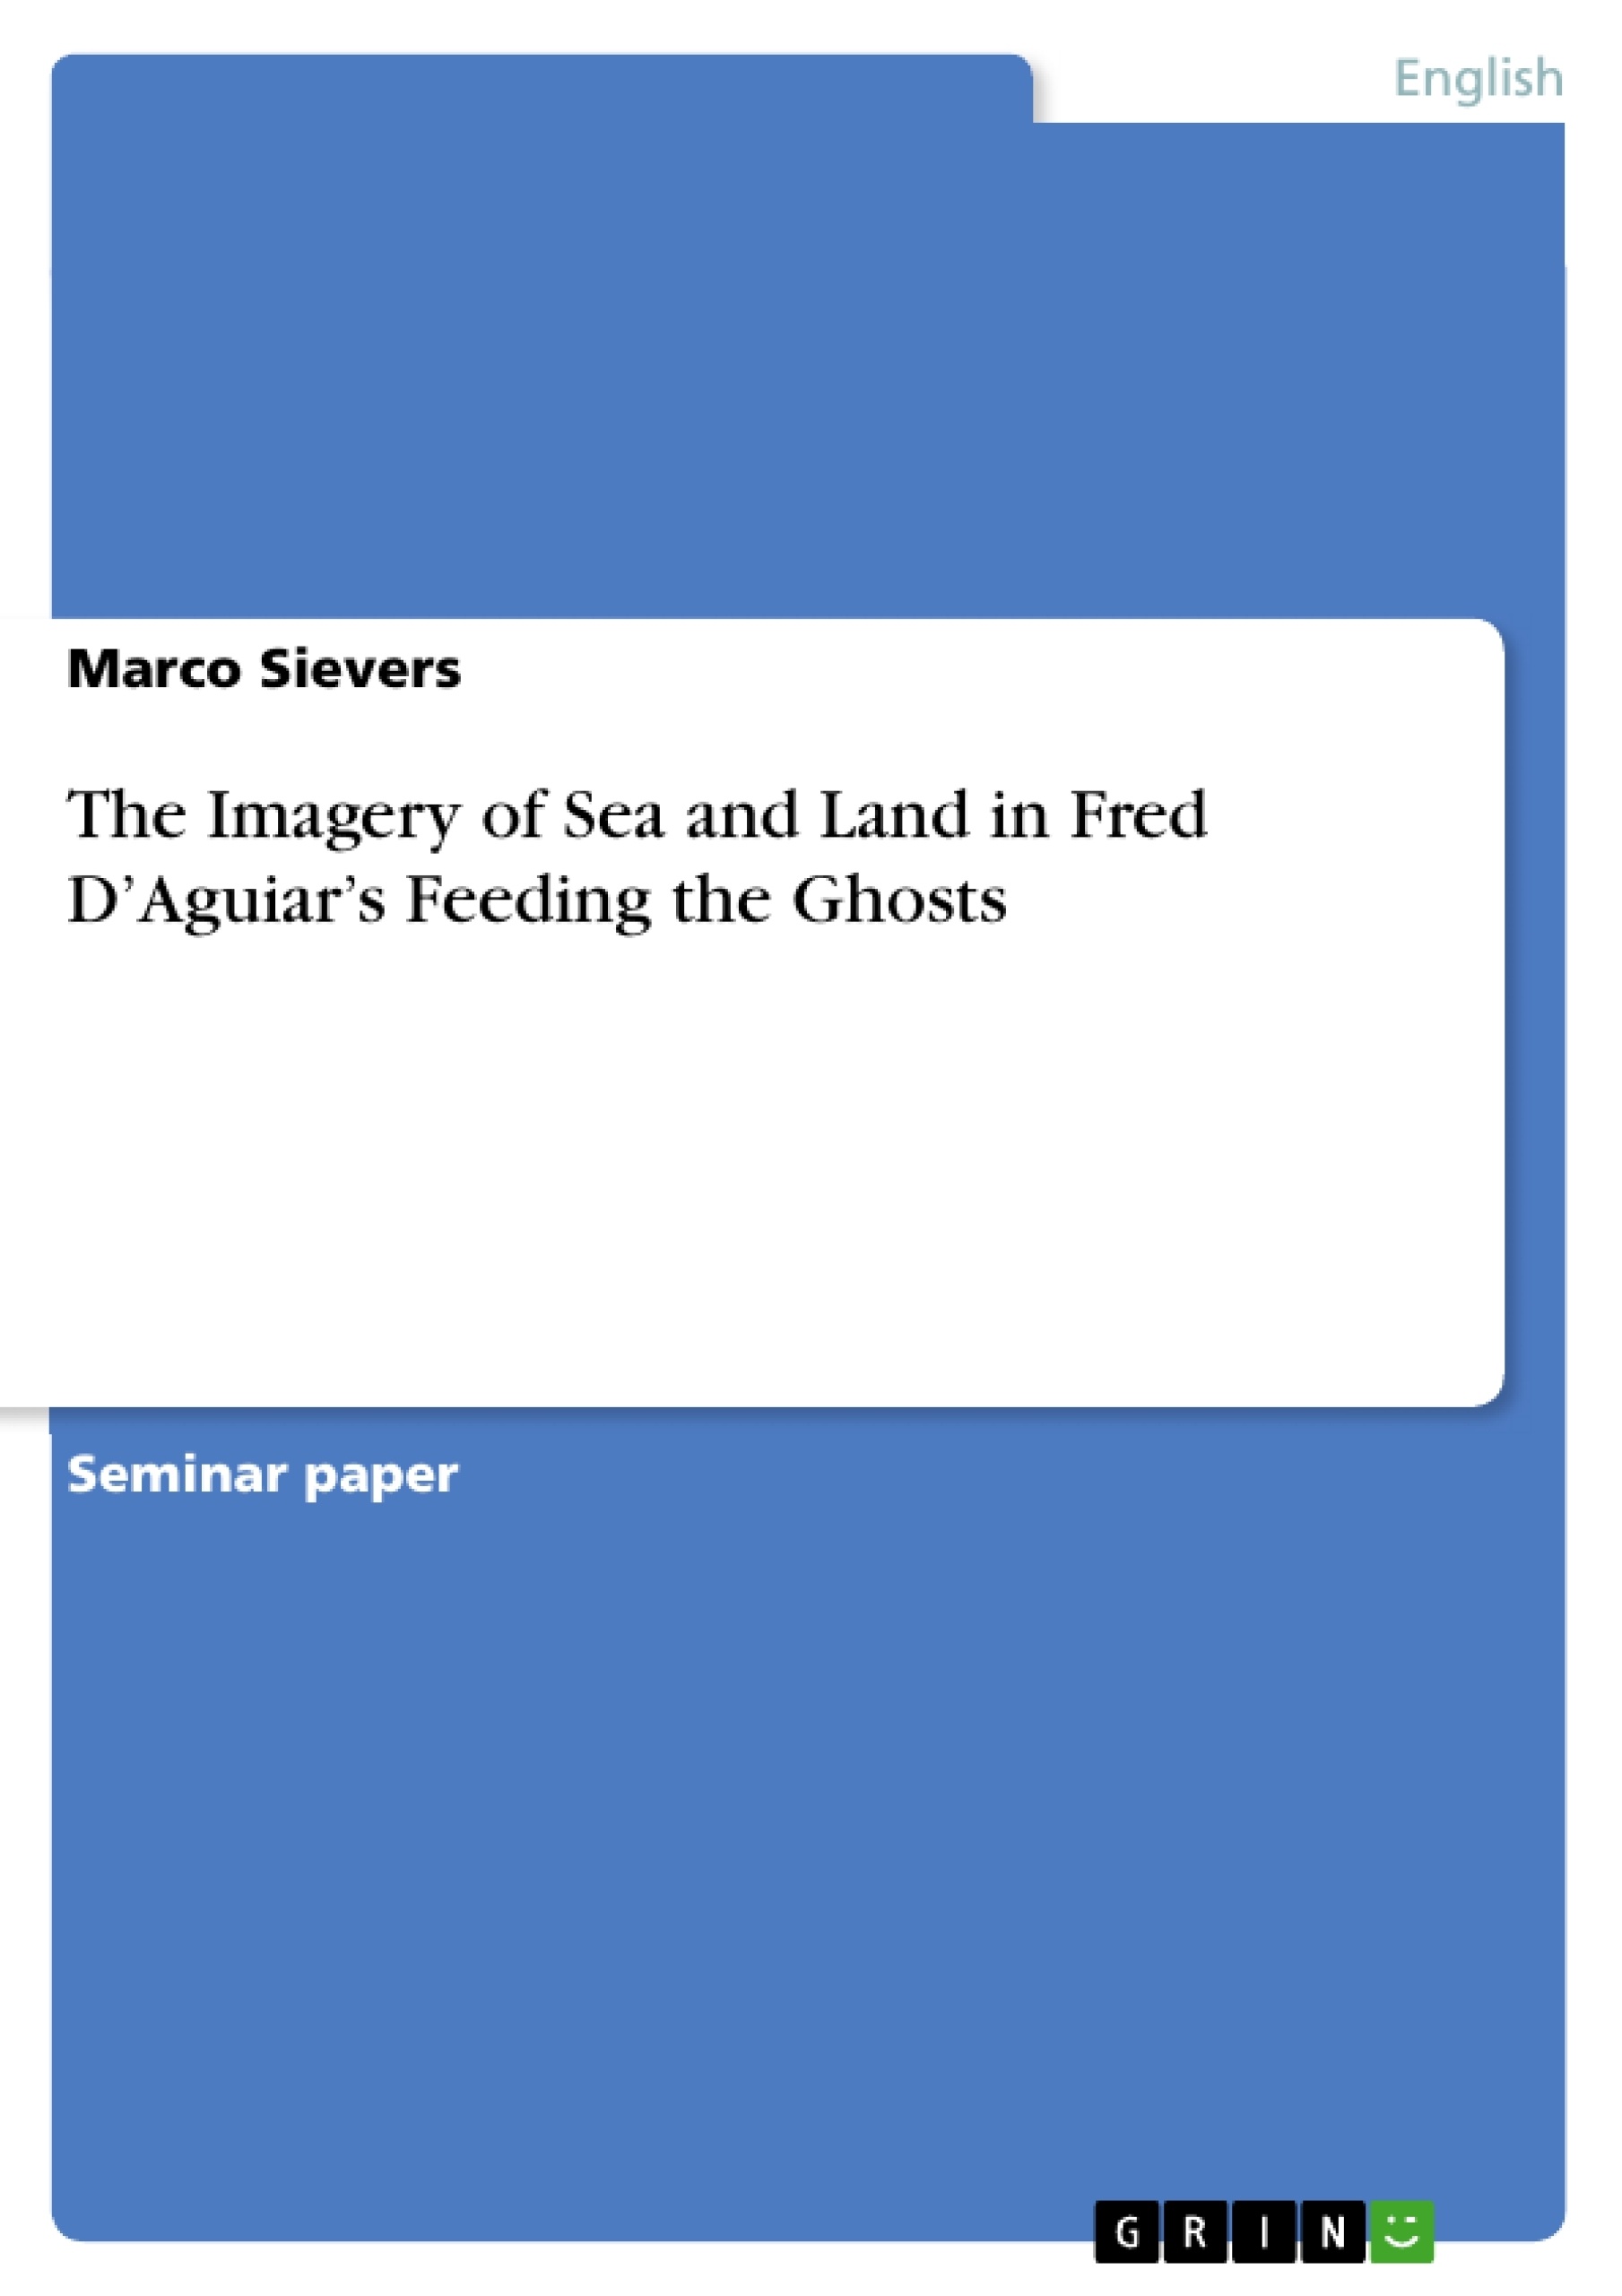 Título: The Imagery of Sea and Land in Fred D’Aguiar’s Feeding the Ghosts 